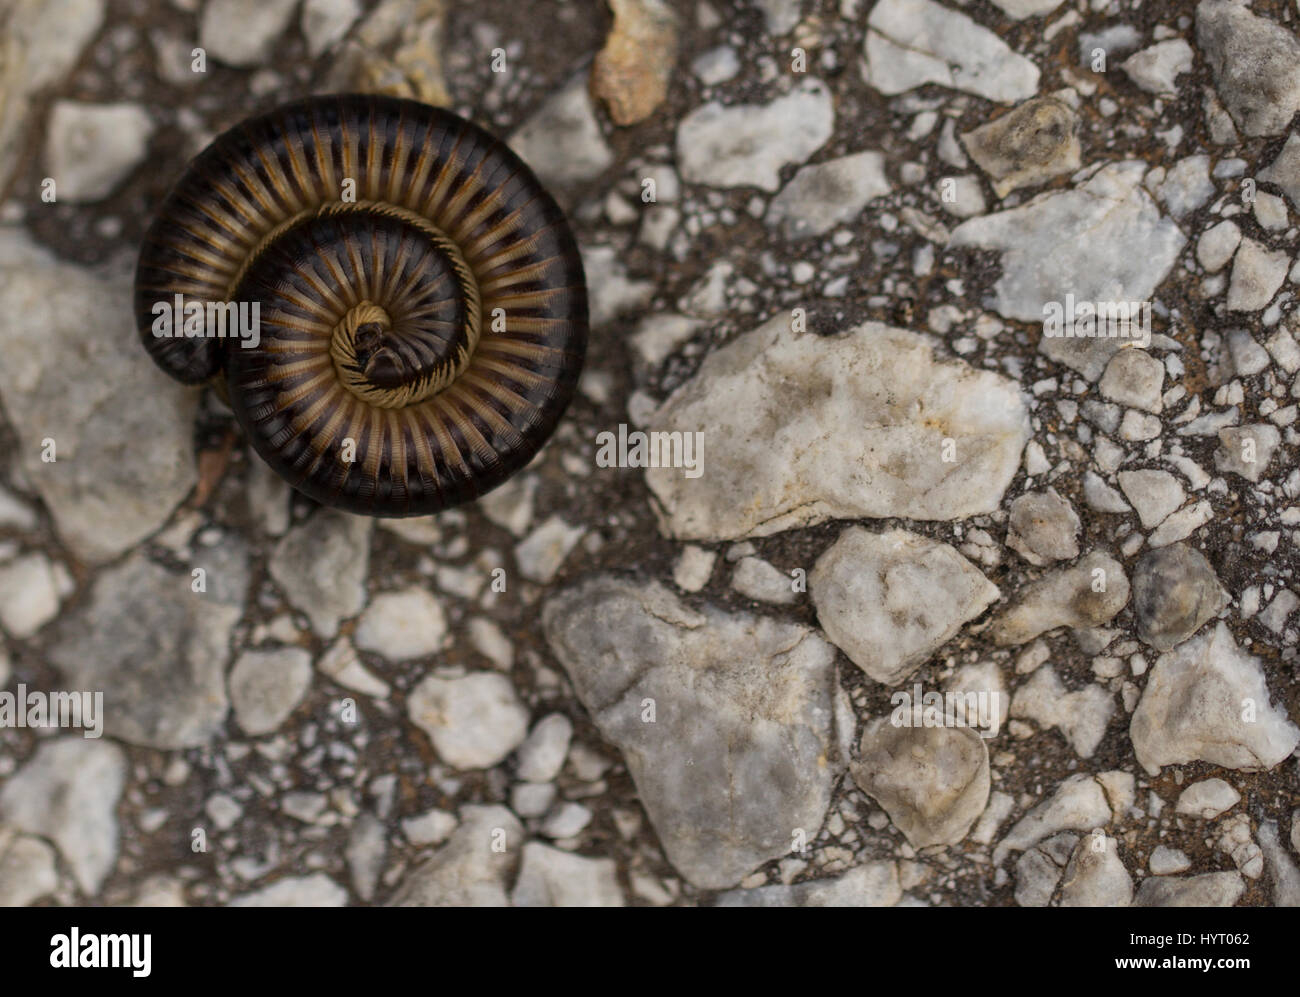 Macro image of a millipede coiled against potential predators Stock Photo